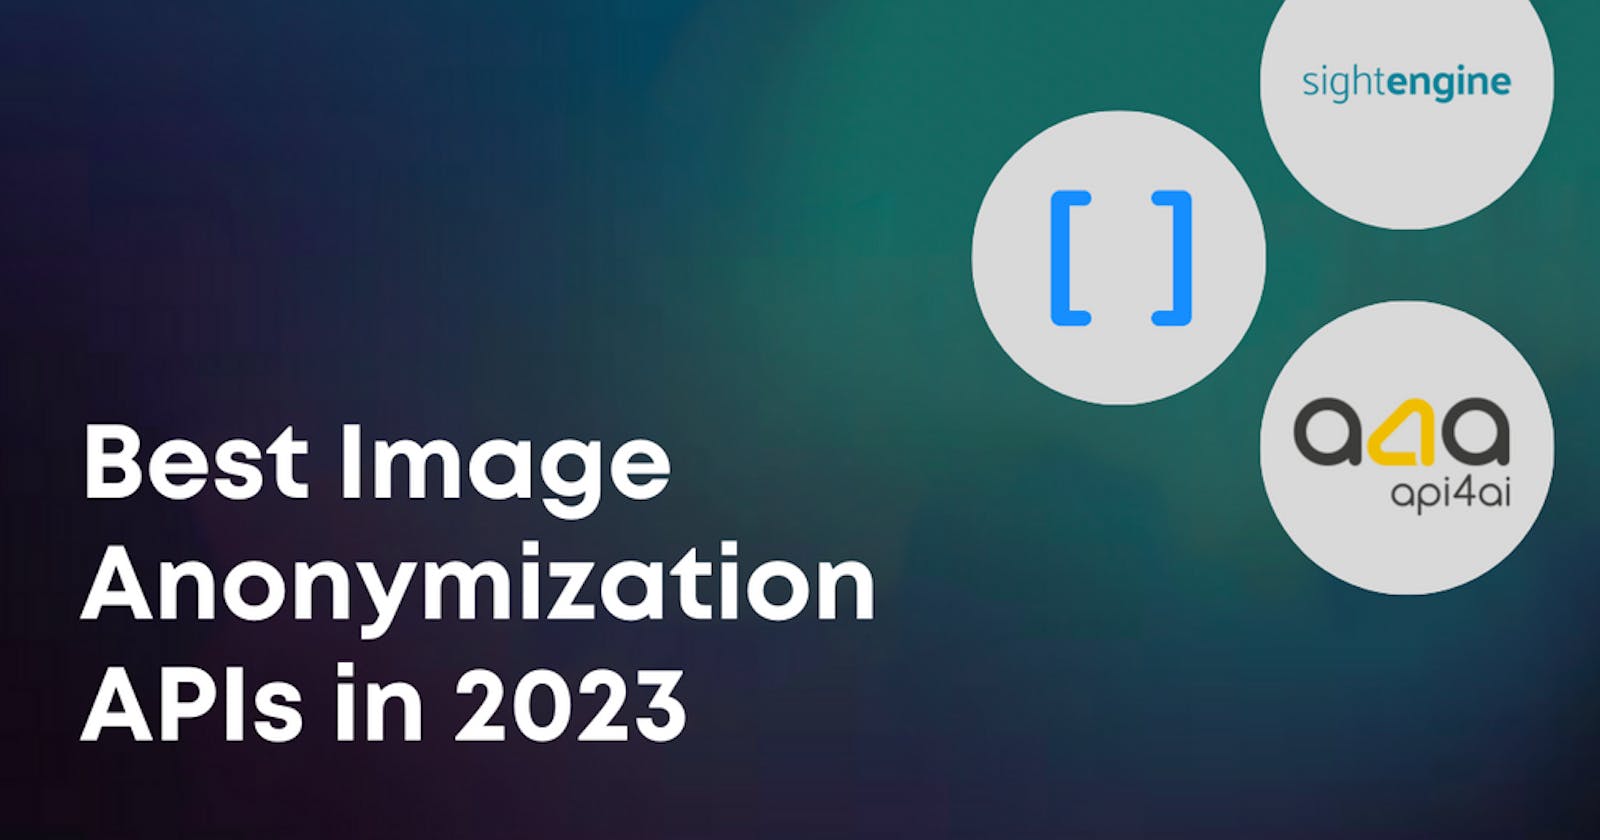 Best Image Anonymization APIs in 2023